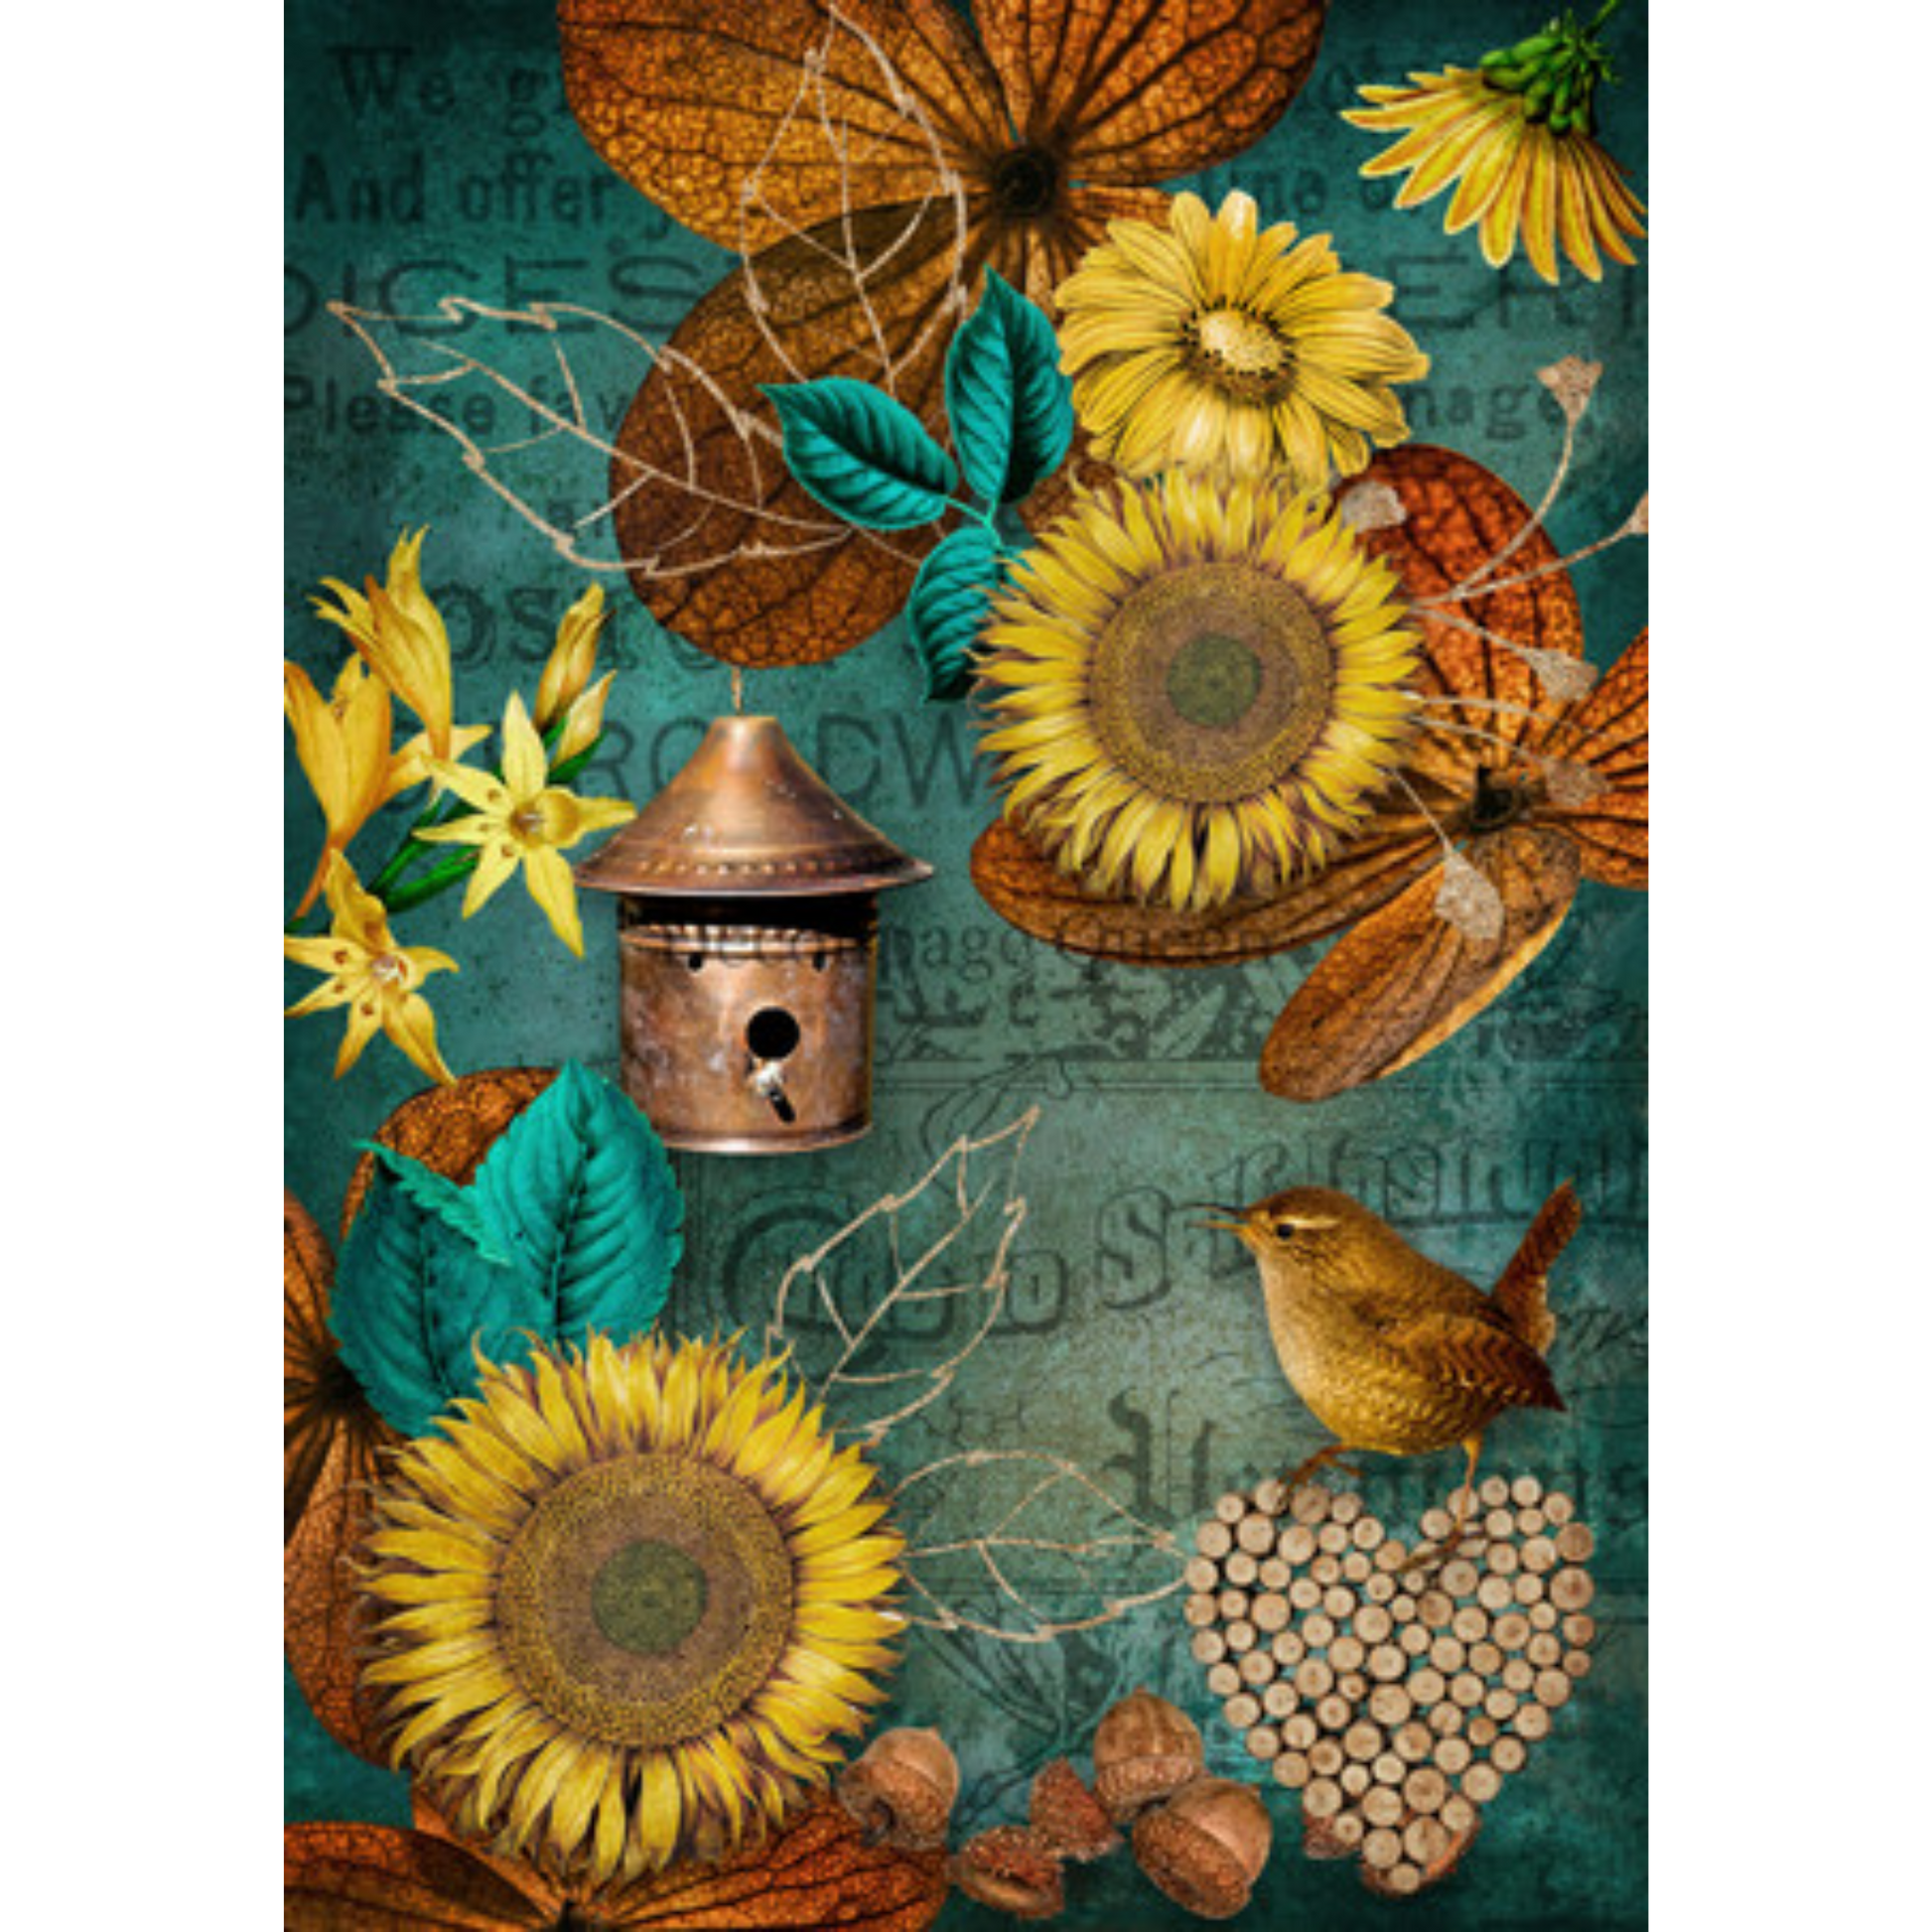 "Autumn Sunflowers" decoupage rice paper by Decoupage Queen. Available at Milton's Daughter.